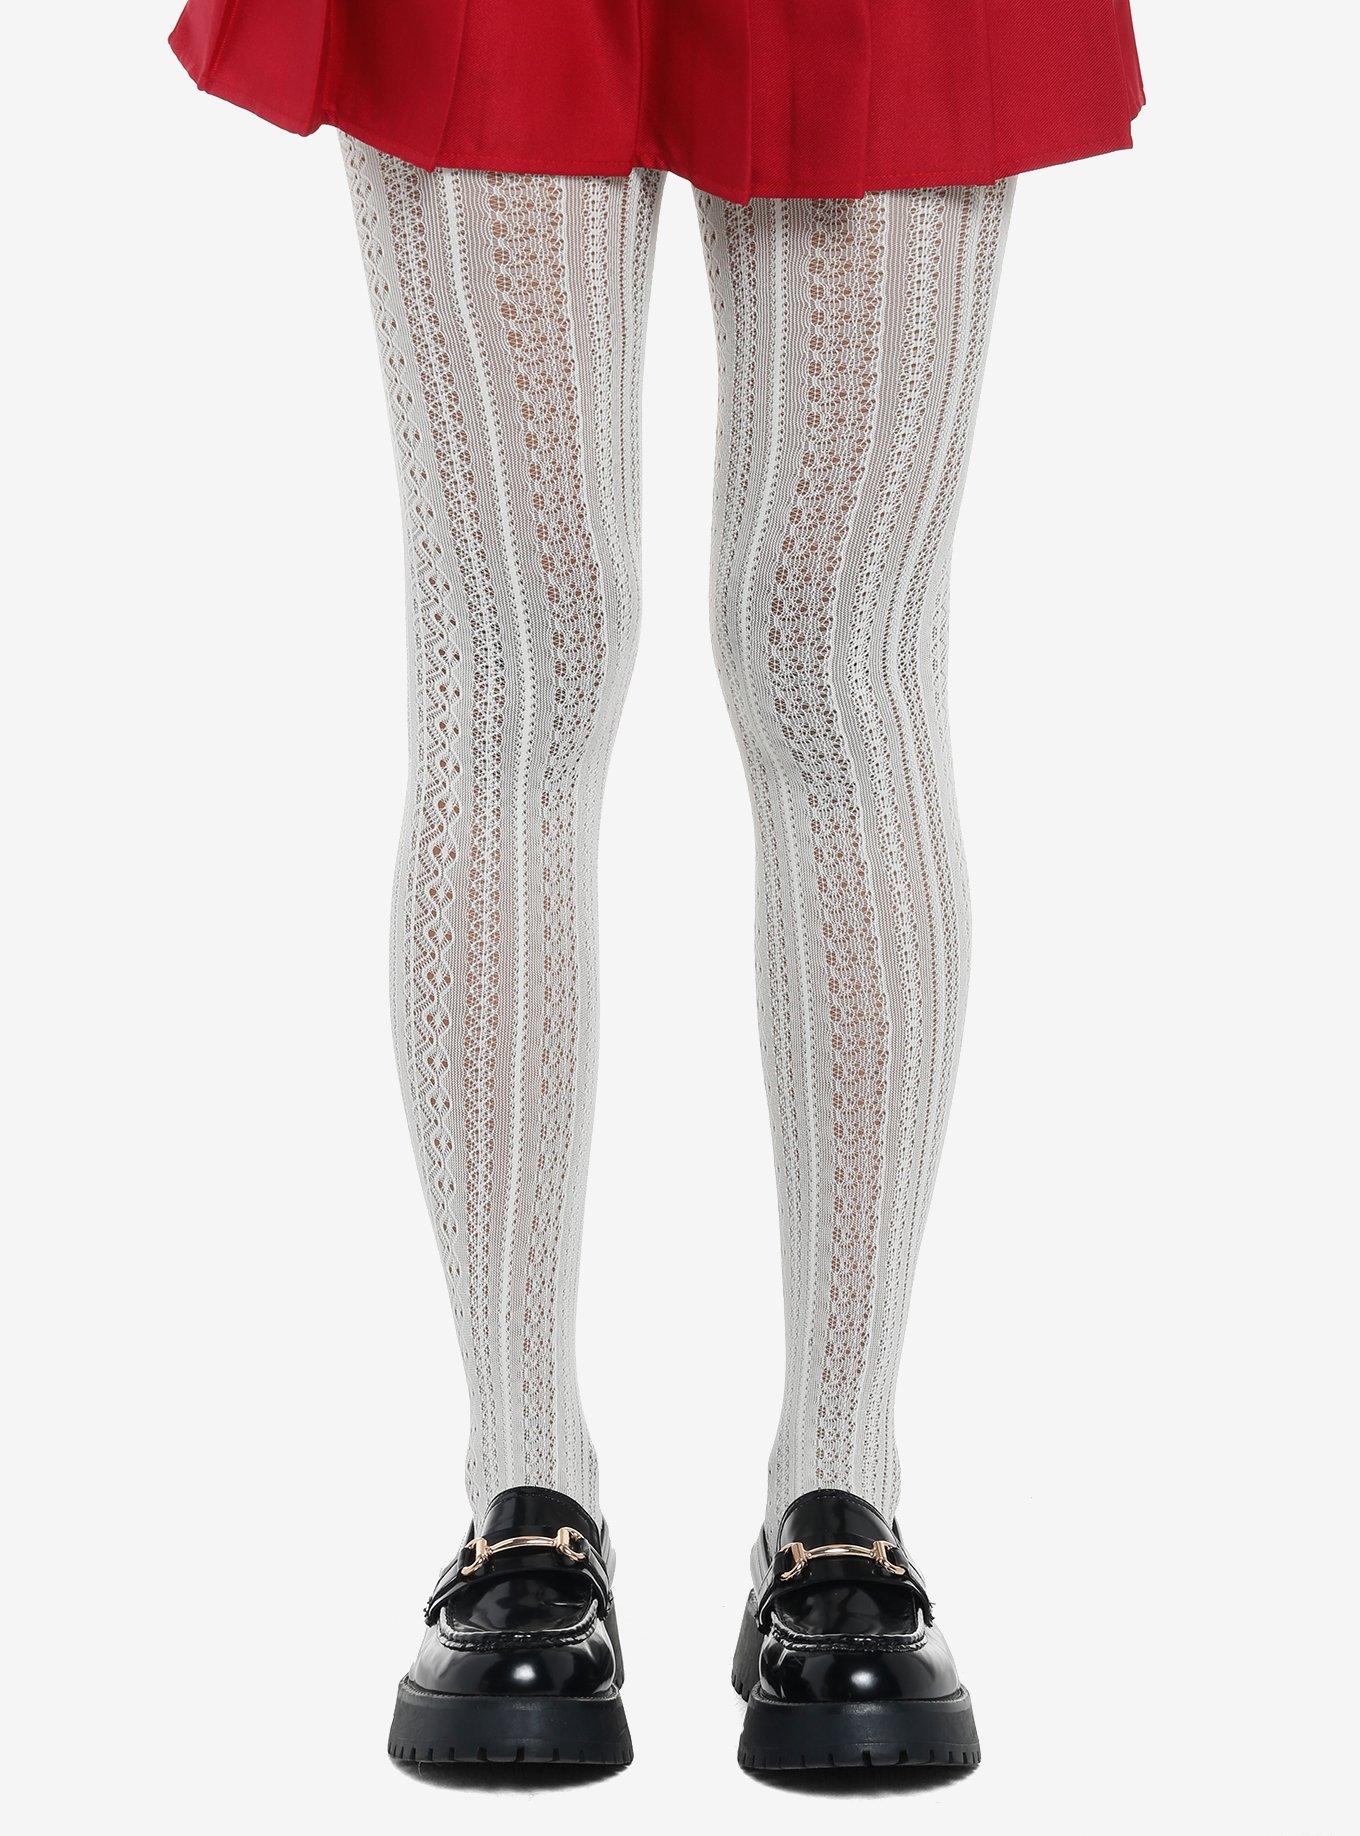 White Crochet Knit Tights | Hot Topic